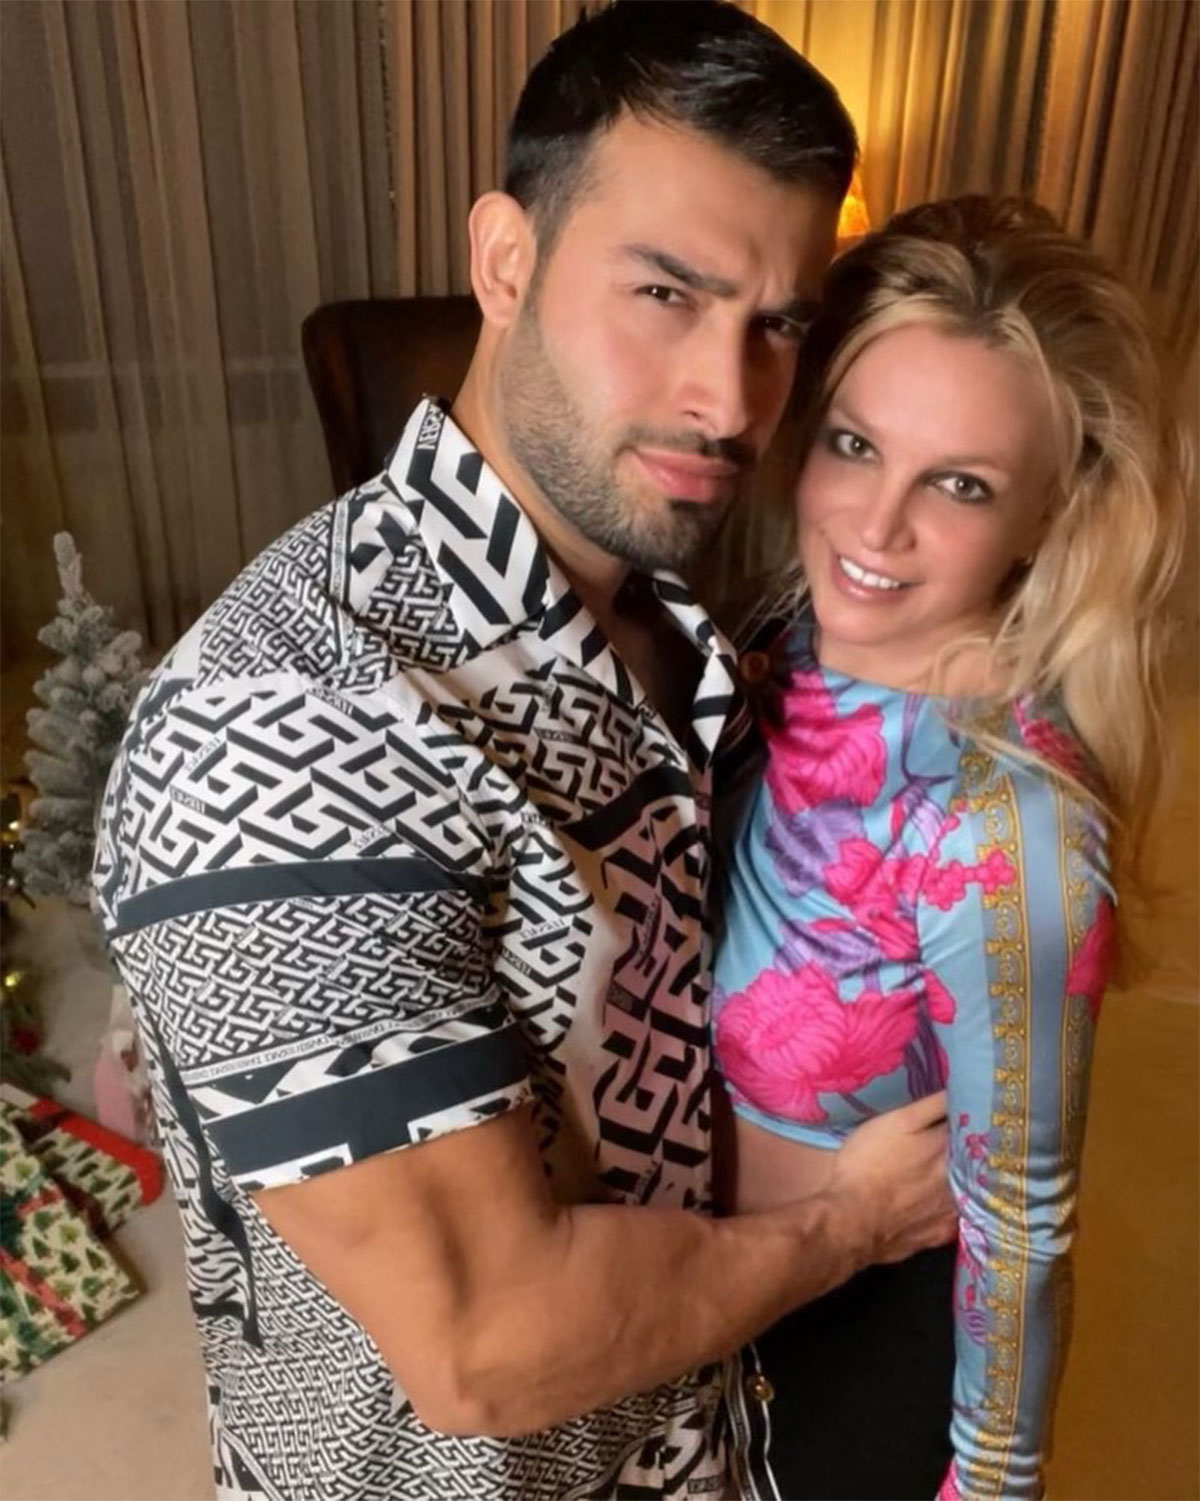 Sam Asghari Quotes About Having Kids With Fiancee Britney Spears